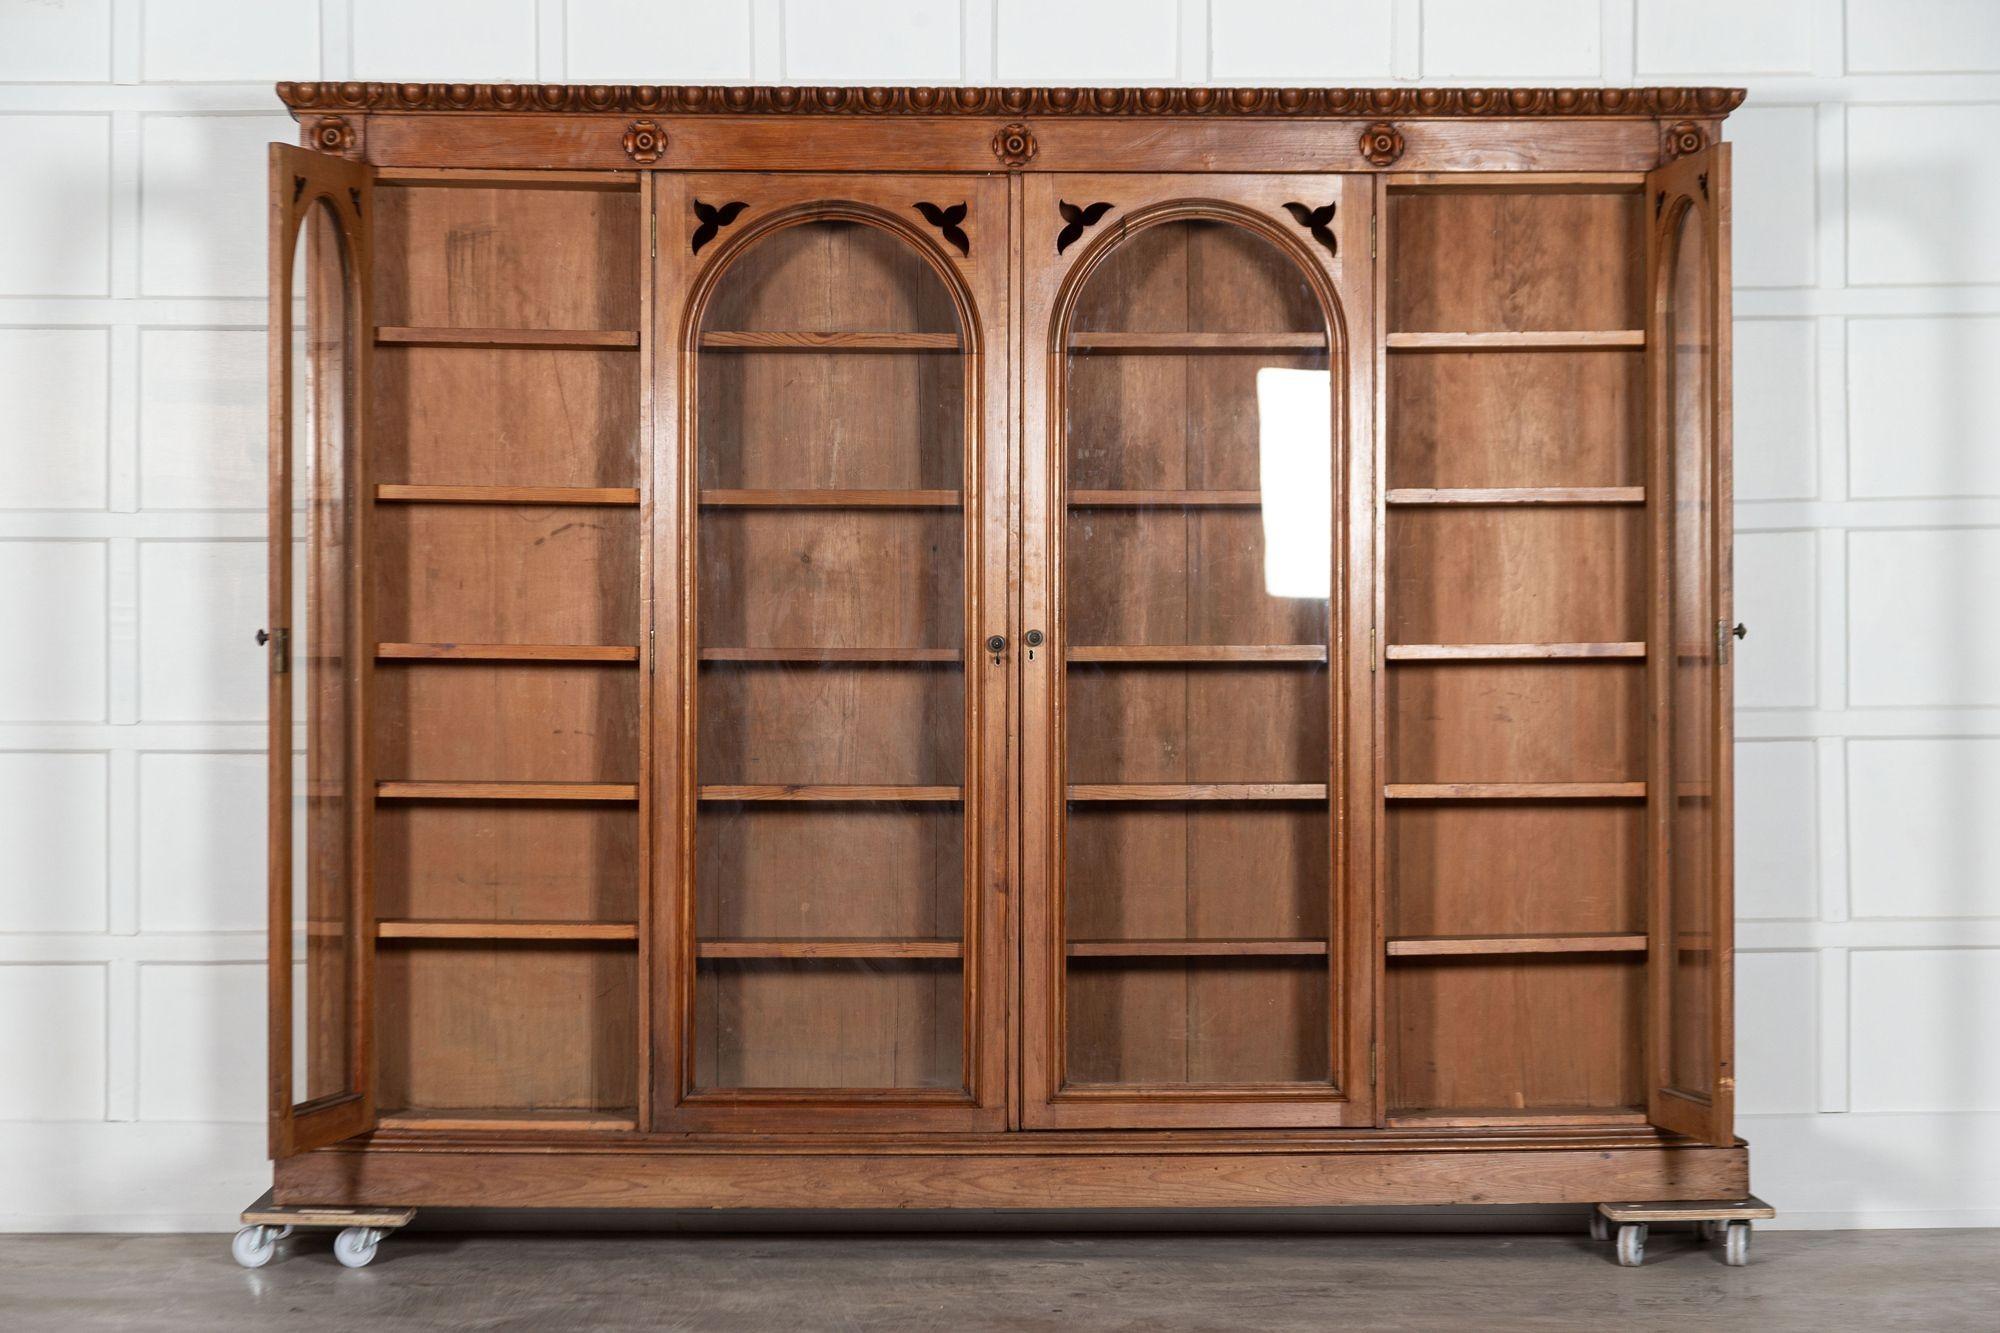 Monumental 19th Century English Pine Arched Glazed Bookcase In Good Condition For Sale In Staffordshire, GB